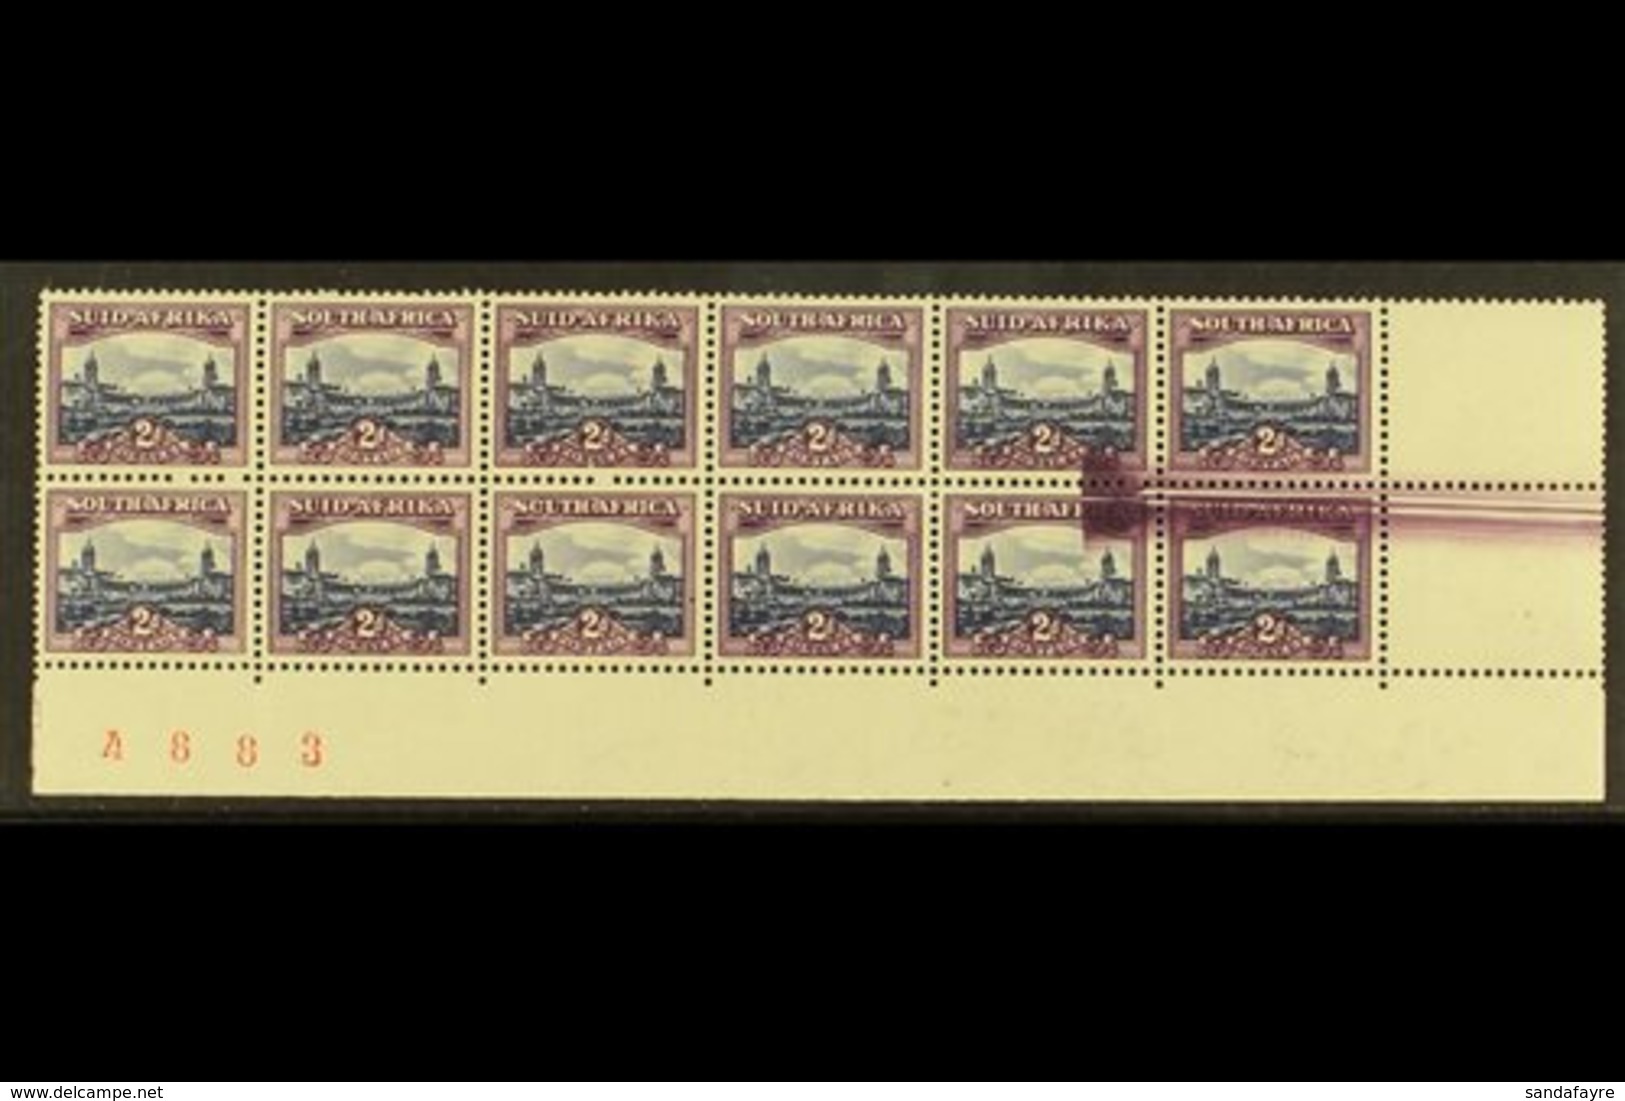 UNION VARIETY 1950-1 2d Blue & Violet, Ex Cylinder 18/30, Issue 15, Corner Marginal Block Of 12 With LARGE SCREEN FLAW A - Unclassified